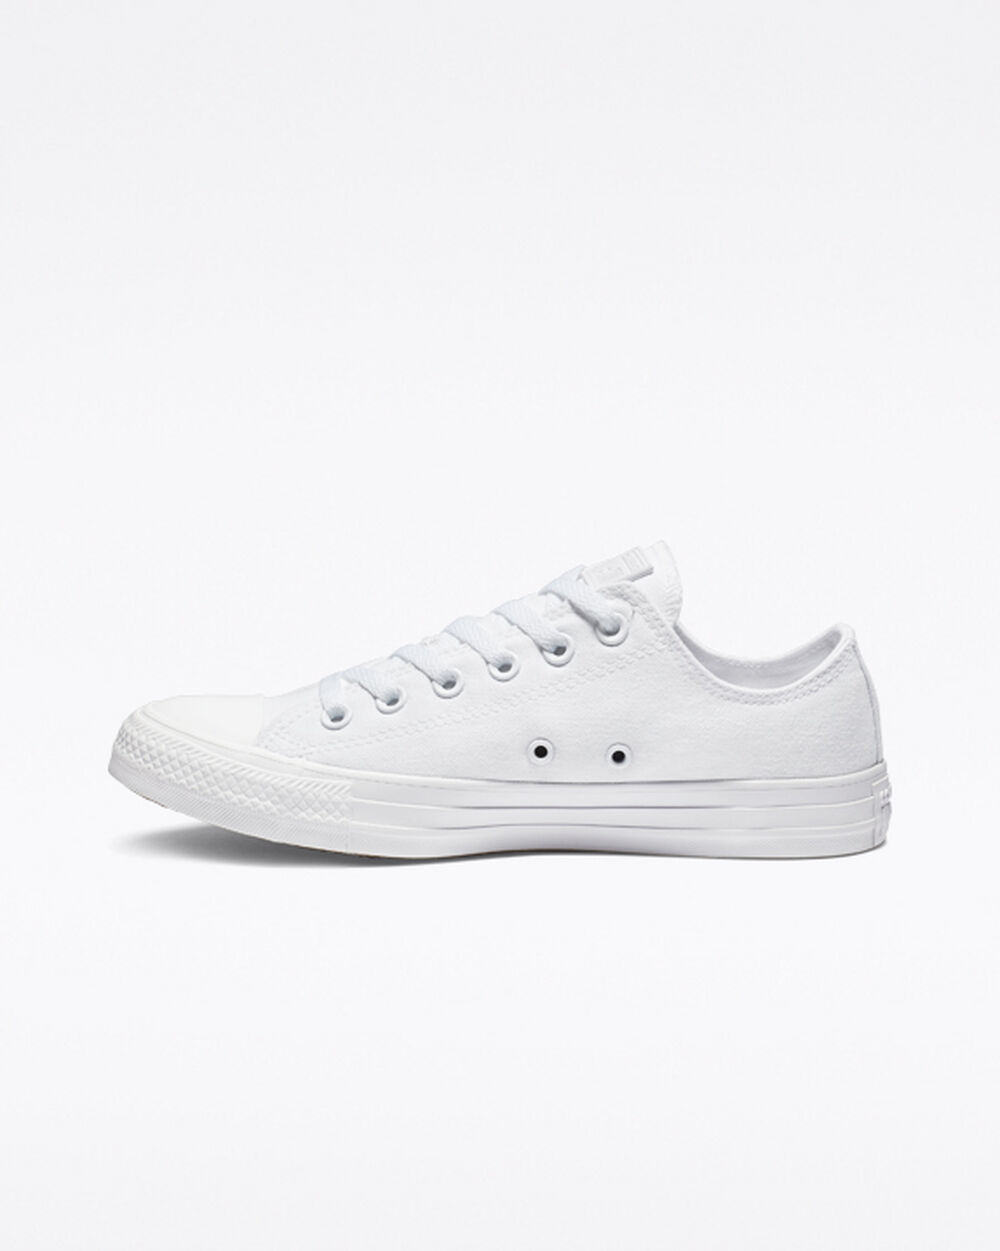 Tenis Converse Chuck Taylor All Star Mujer Blancos | Mexico-513206